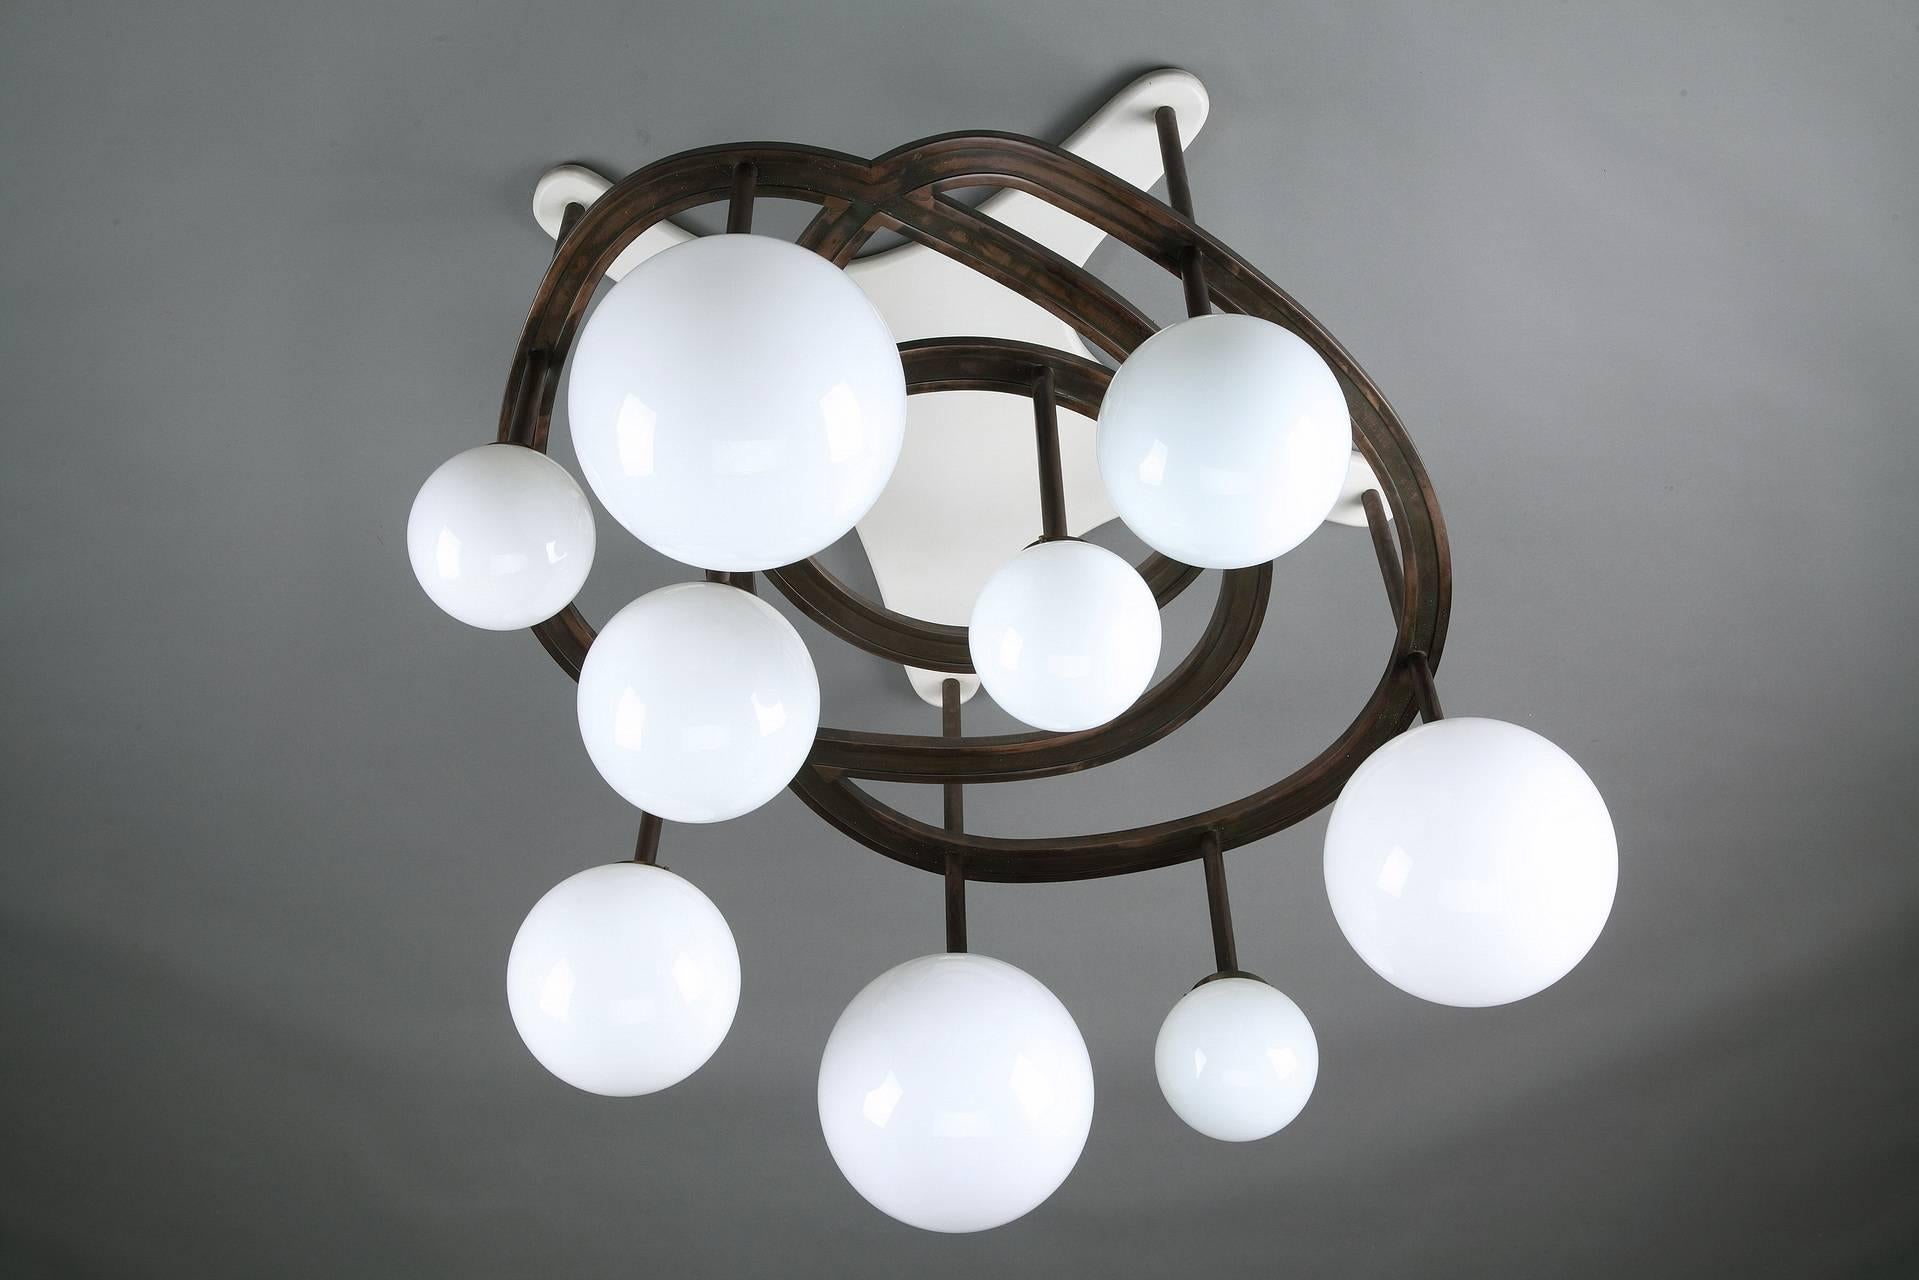 Exquisite chandelier, with white lacquered wood base and copper structure. It has 9 arms decorated with white opaline globes. A sculptural shape, full of elegance and modernity. Unique ceiling lamp designed by Yves Faucheur (French, 1924-1985) for